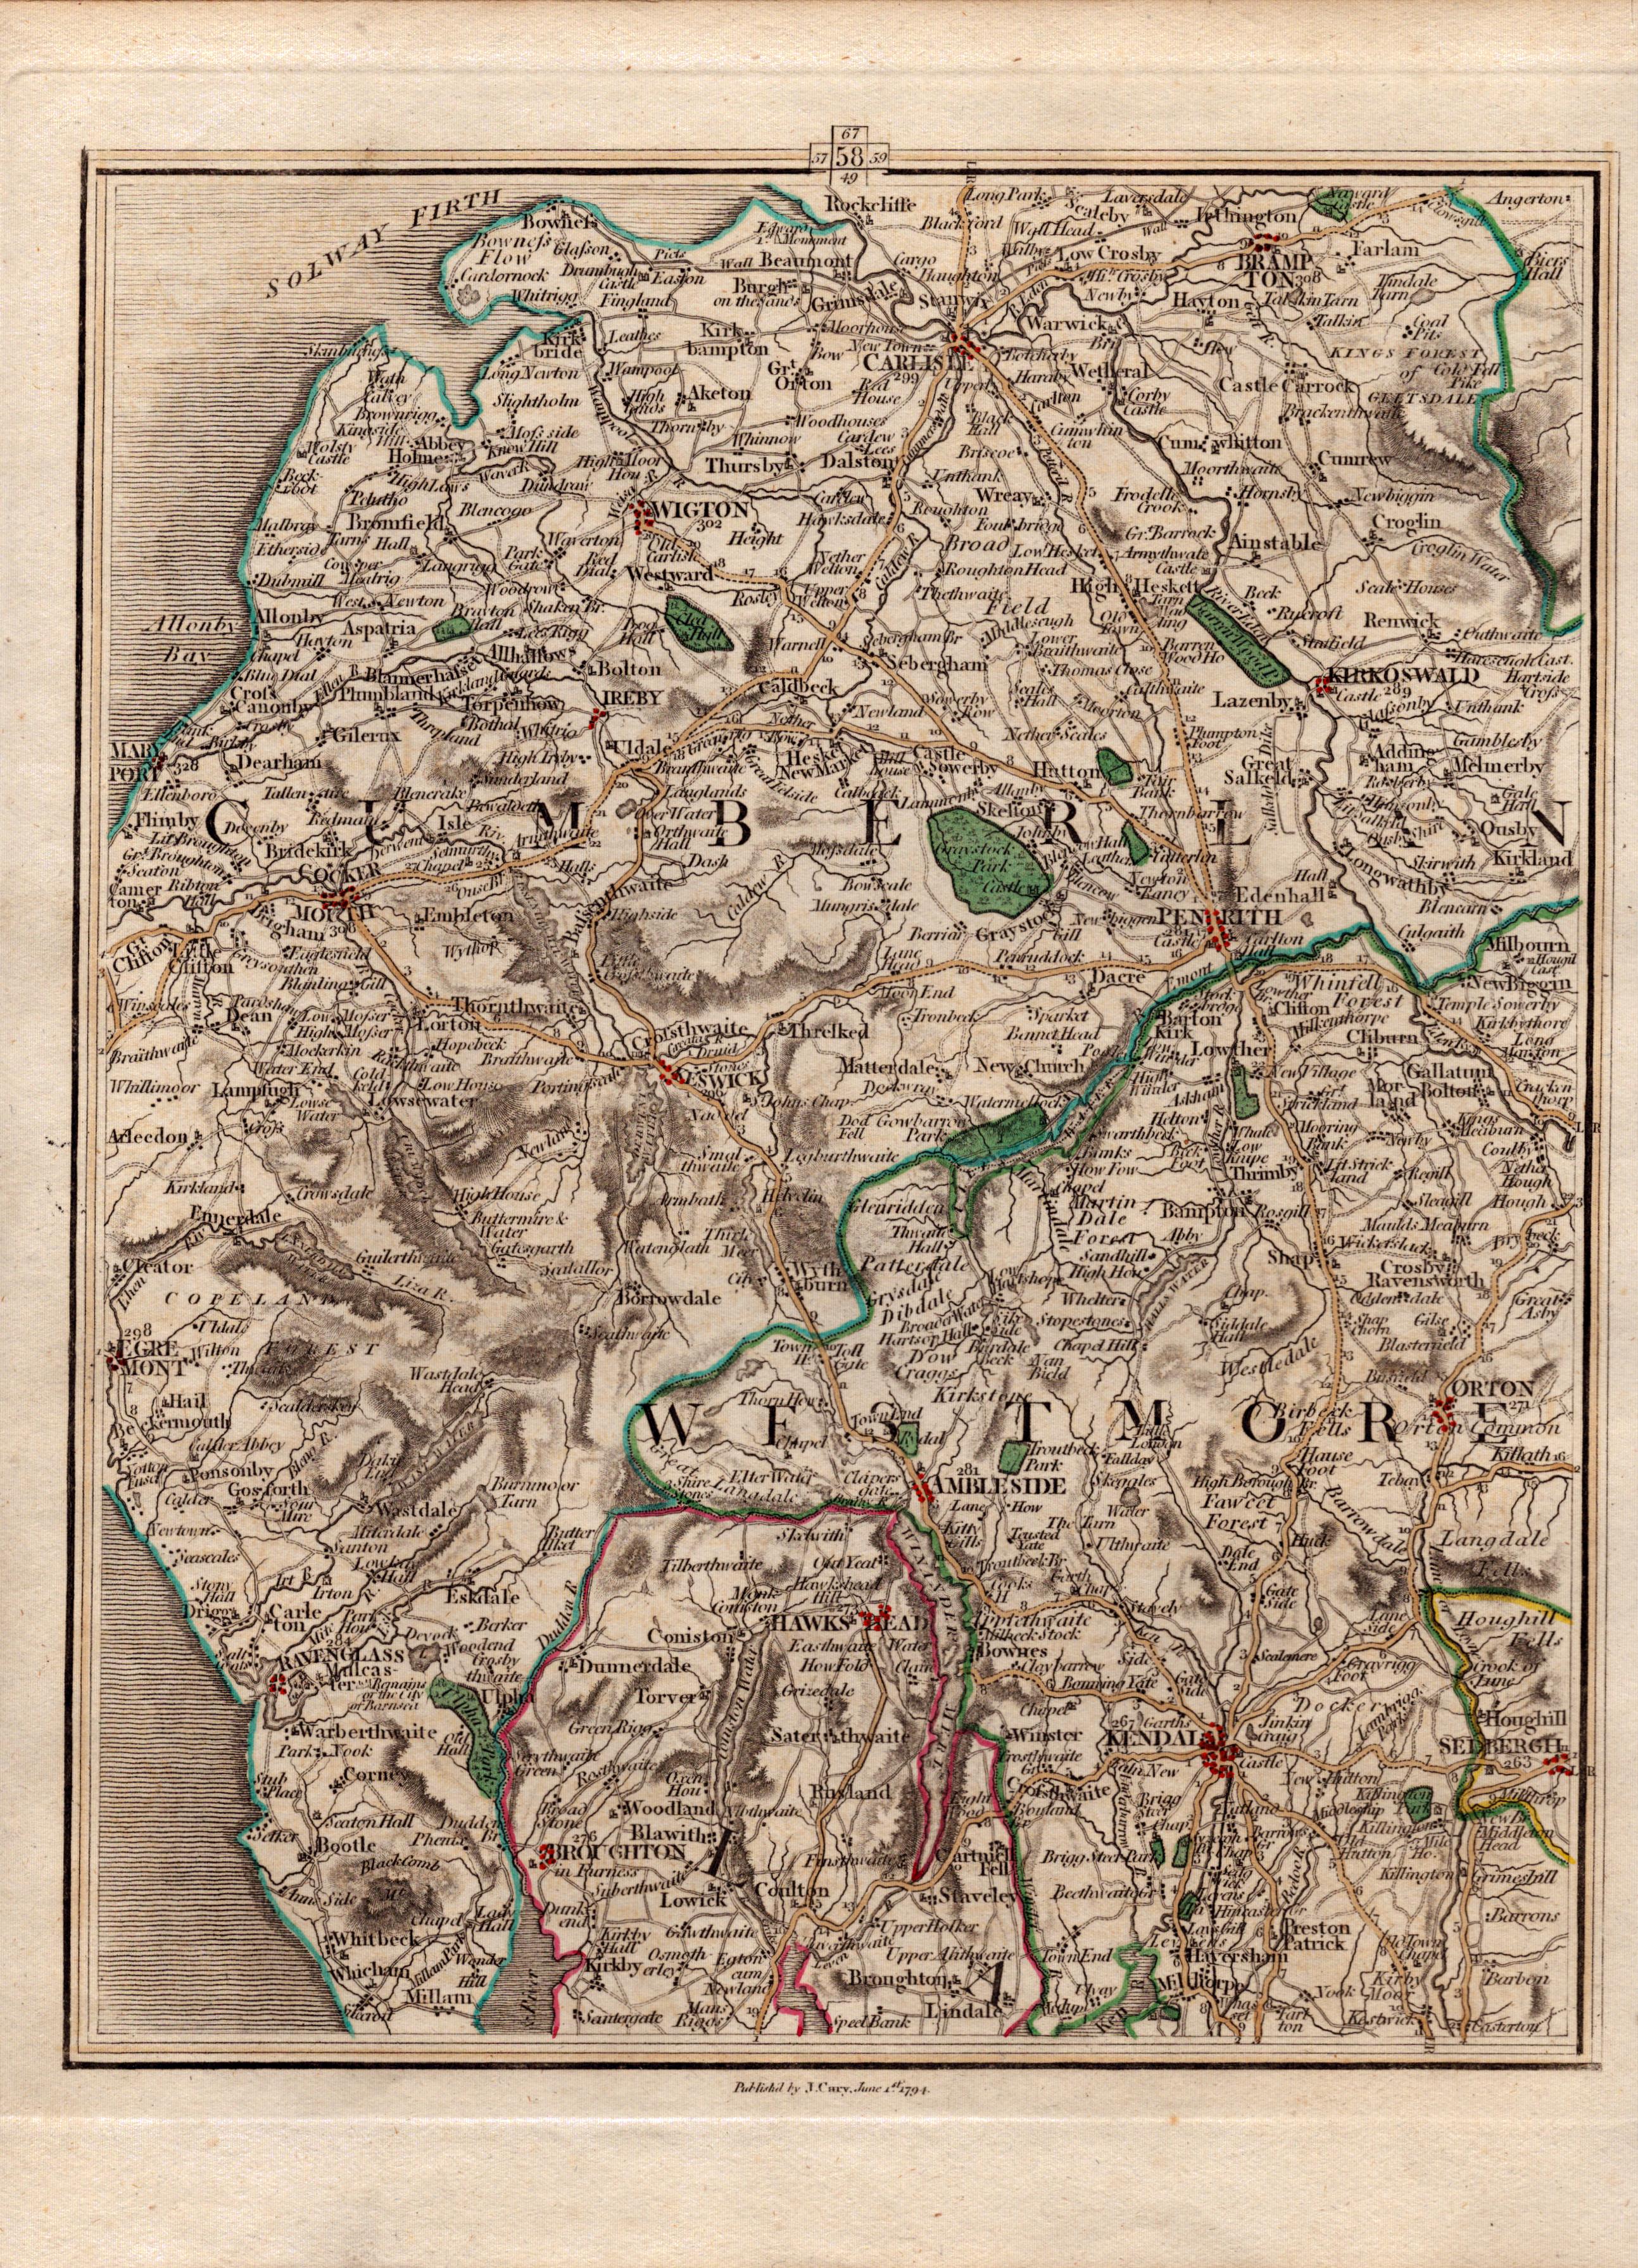 Lake District Kendal Cumbria John Cary's Antique King George III 1794 Map-58.